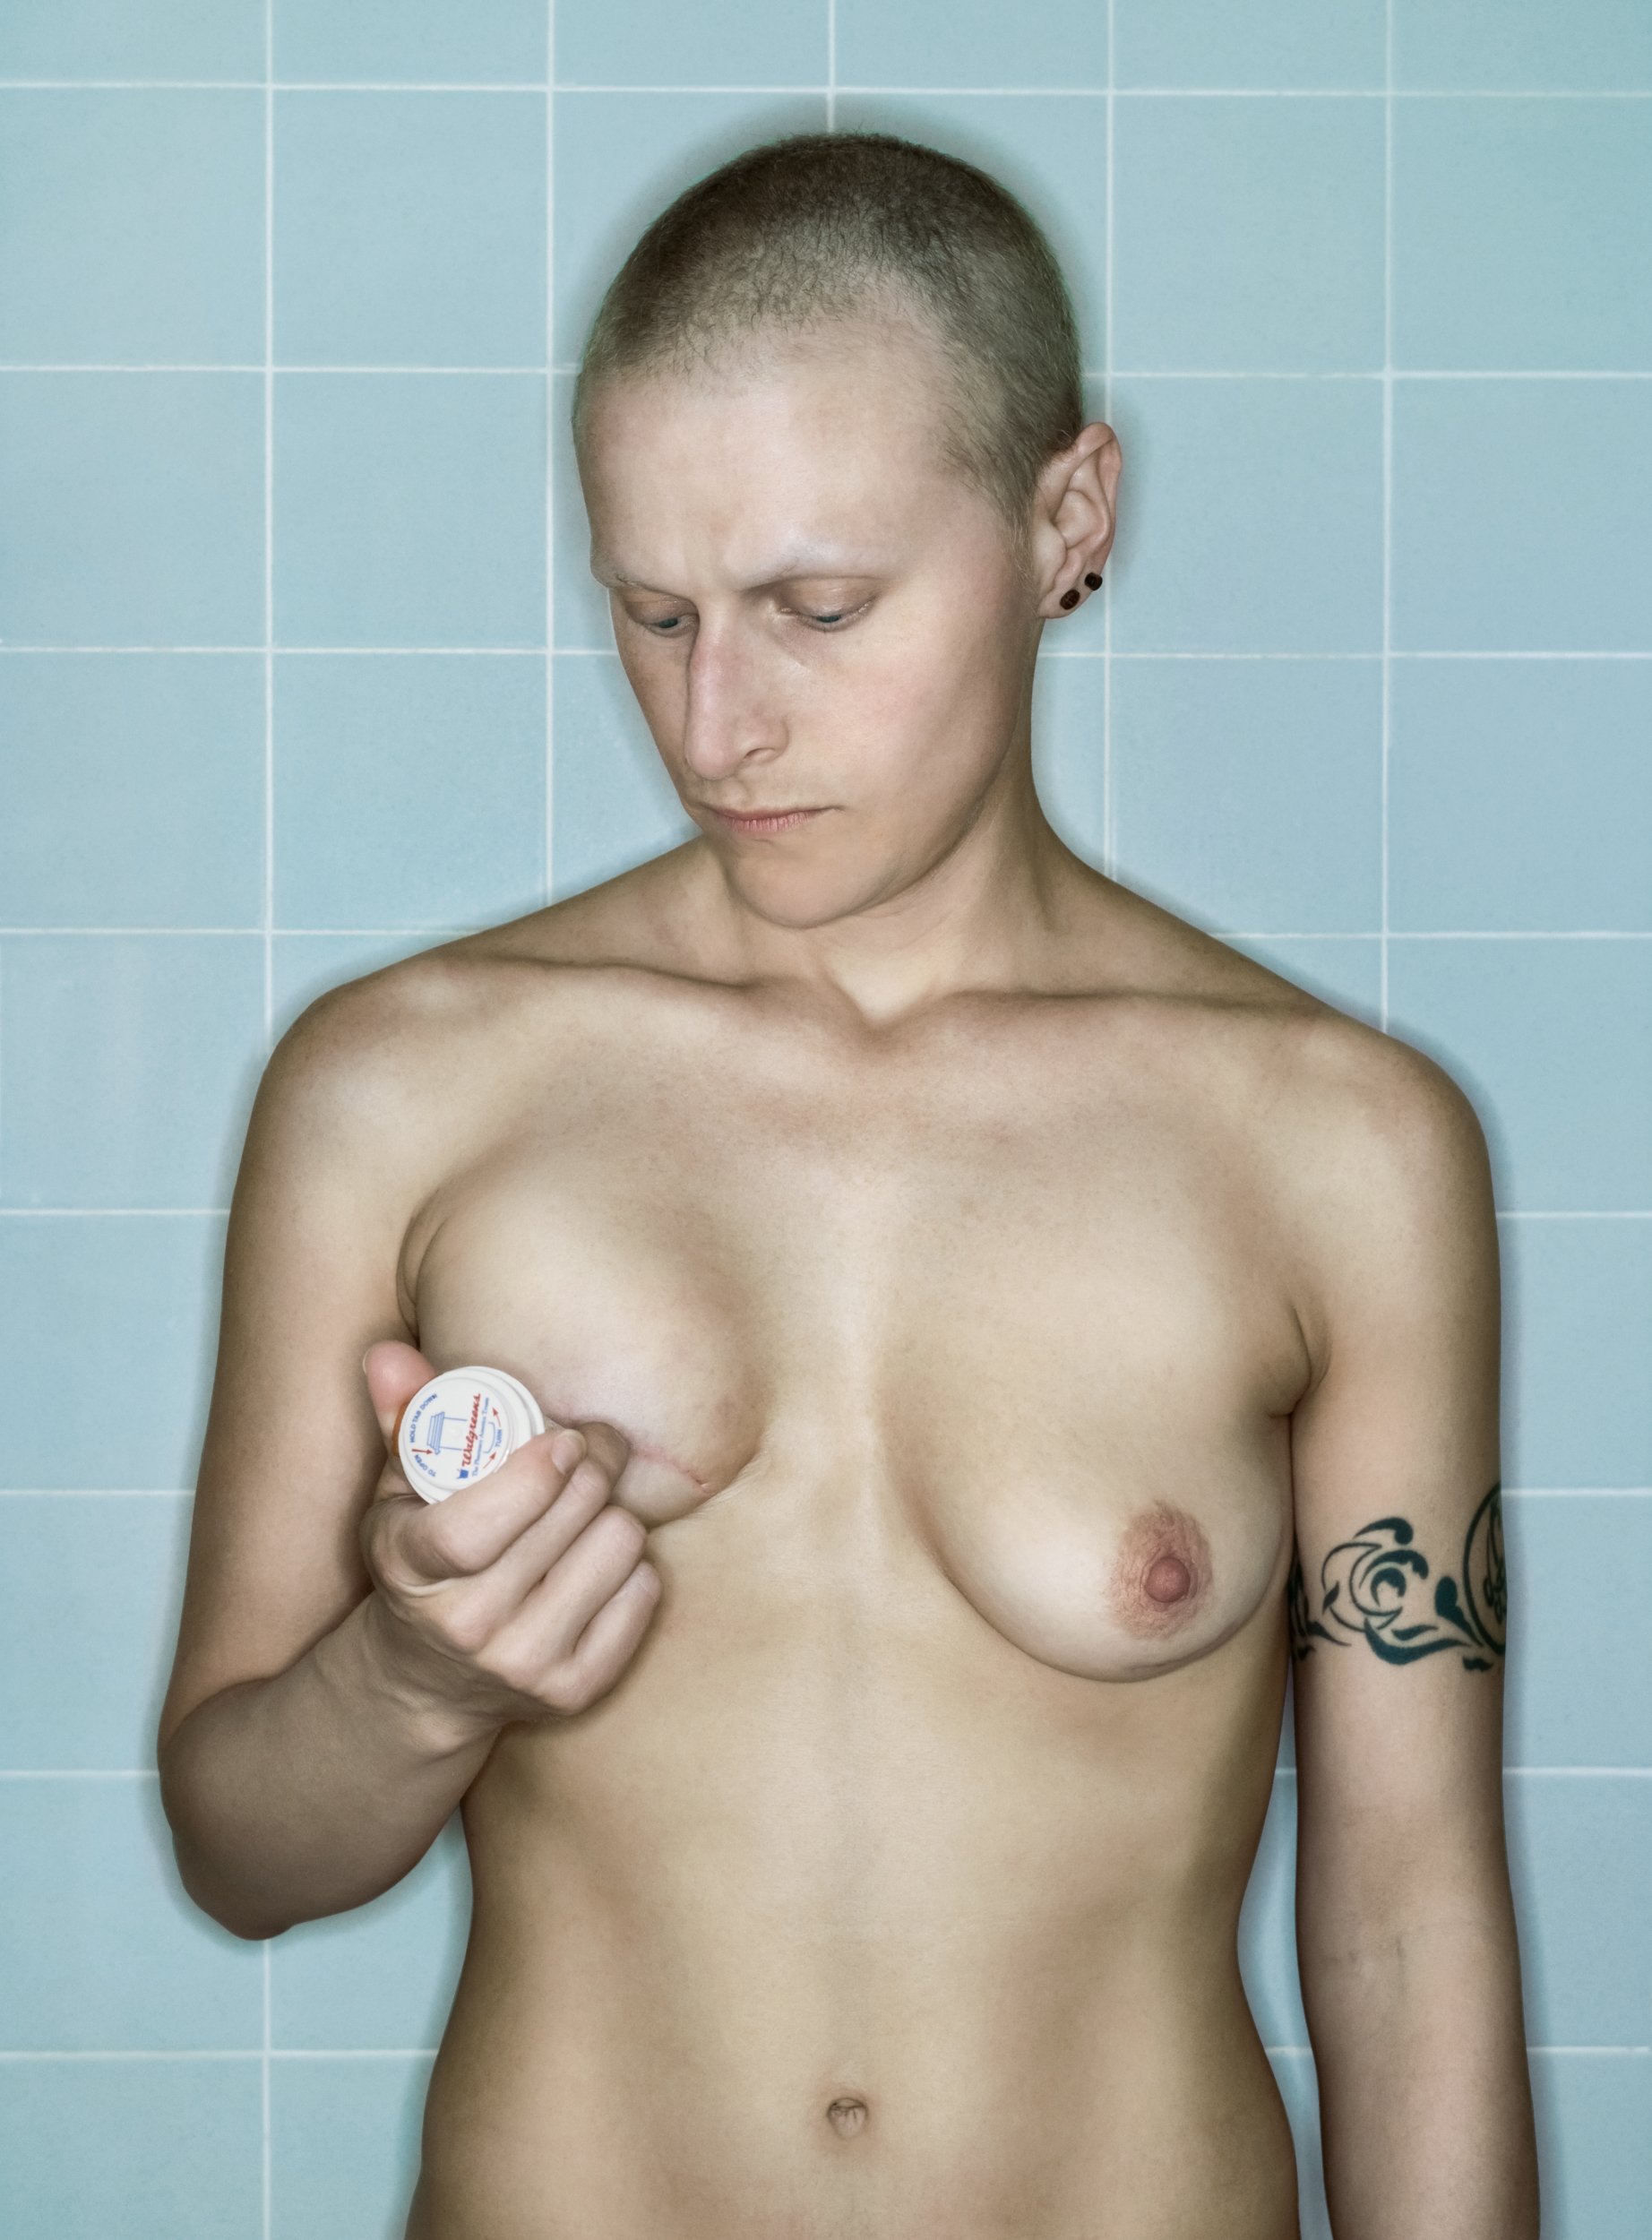 after breast cancer chemotherapy treatment self portrait of kerry mansfield